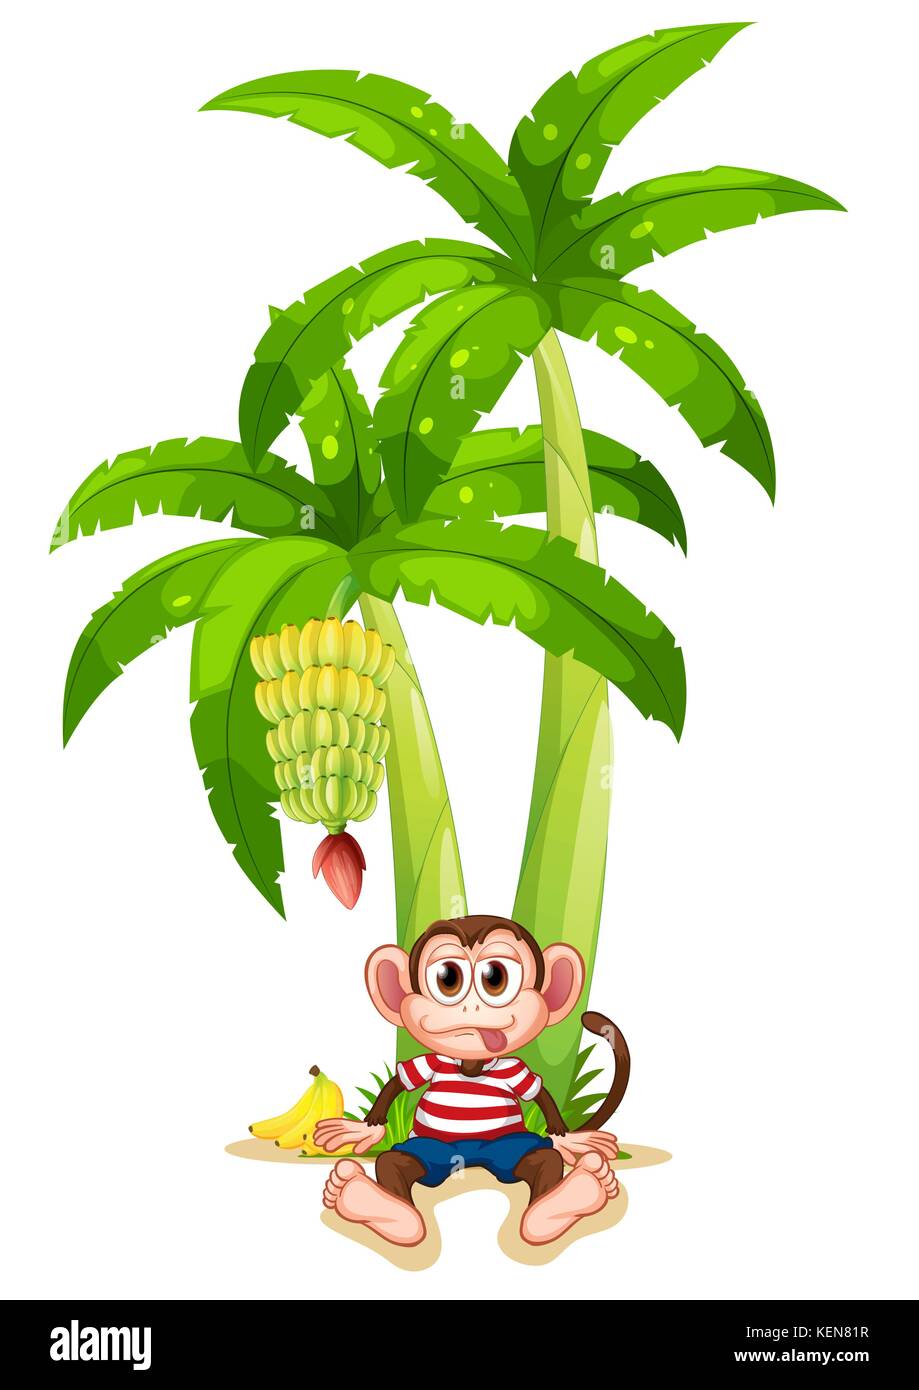 Illustration of a monkey under the banana plant on a white background Stock Vector